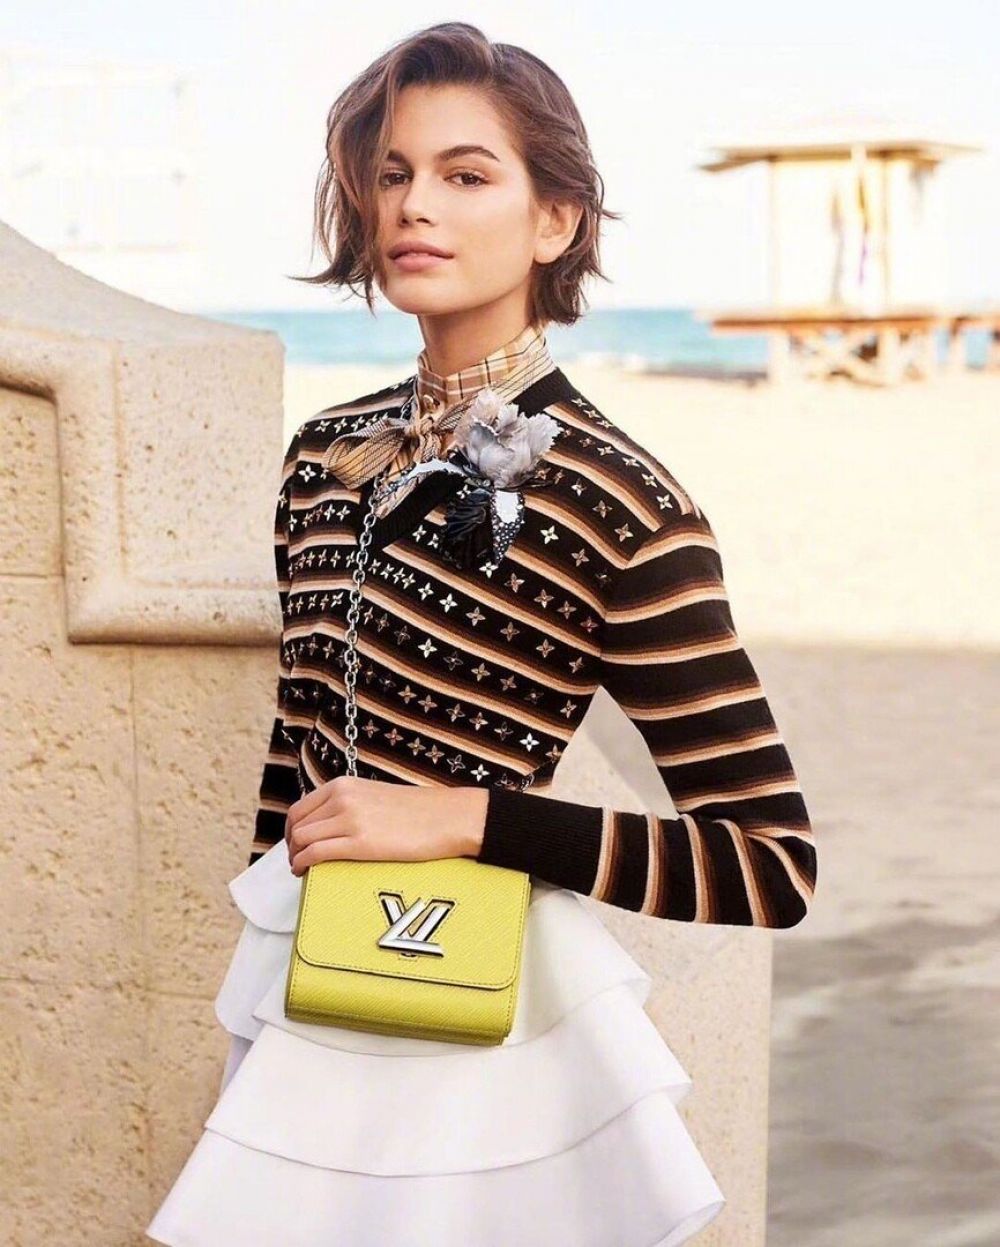 KAIA GERBER for Louis Vuitton Twist Bags for Spring 2020 Campaign – HawtCelebs